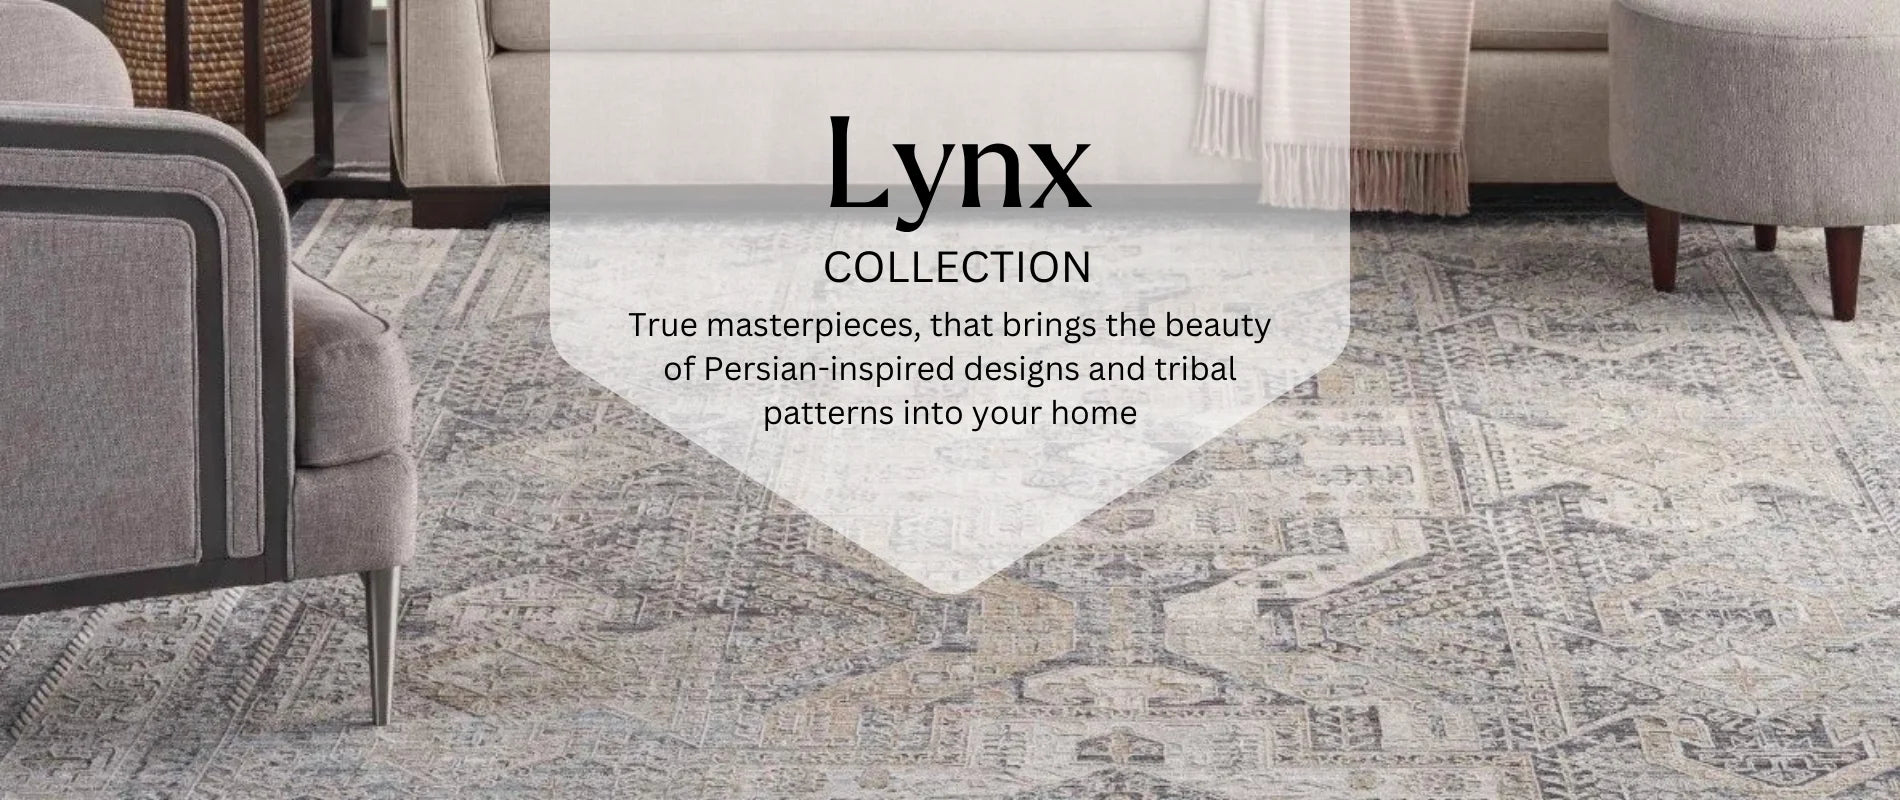 Persian-inspired Lync Collection Rugs by Nourison, featuring beautiful tribal patterns for home decor